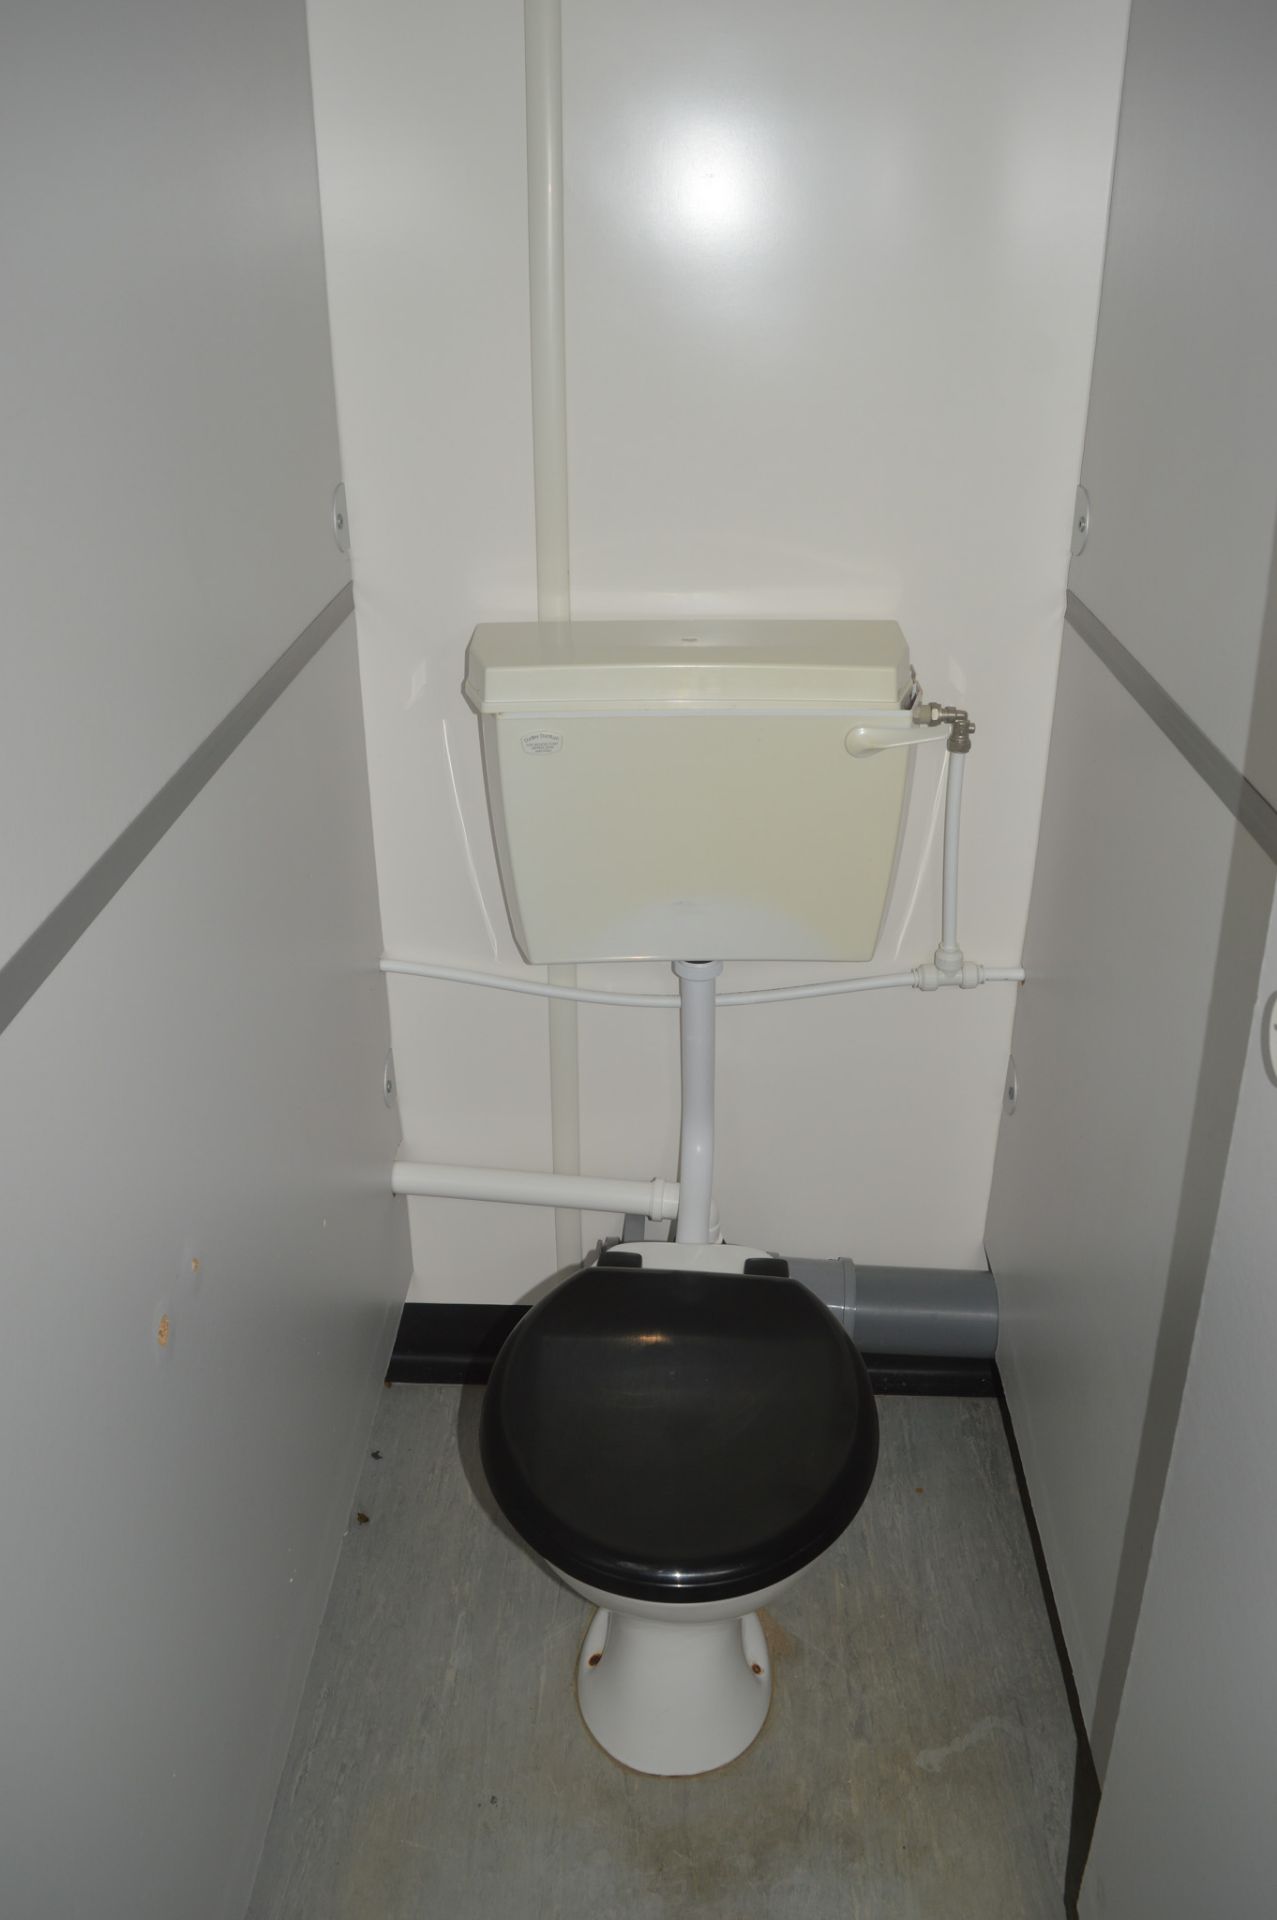 12 ft x 8 ft jack leg steel anti vandal toilet block  Comprising 2 cubicle toilets, 2 urinals and - Image 7 of 8